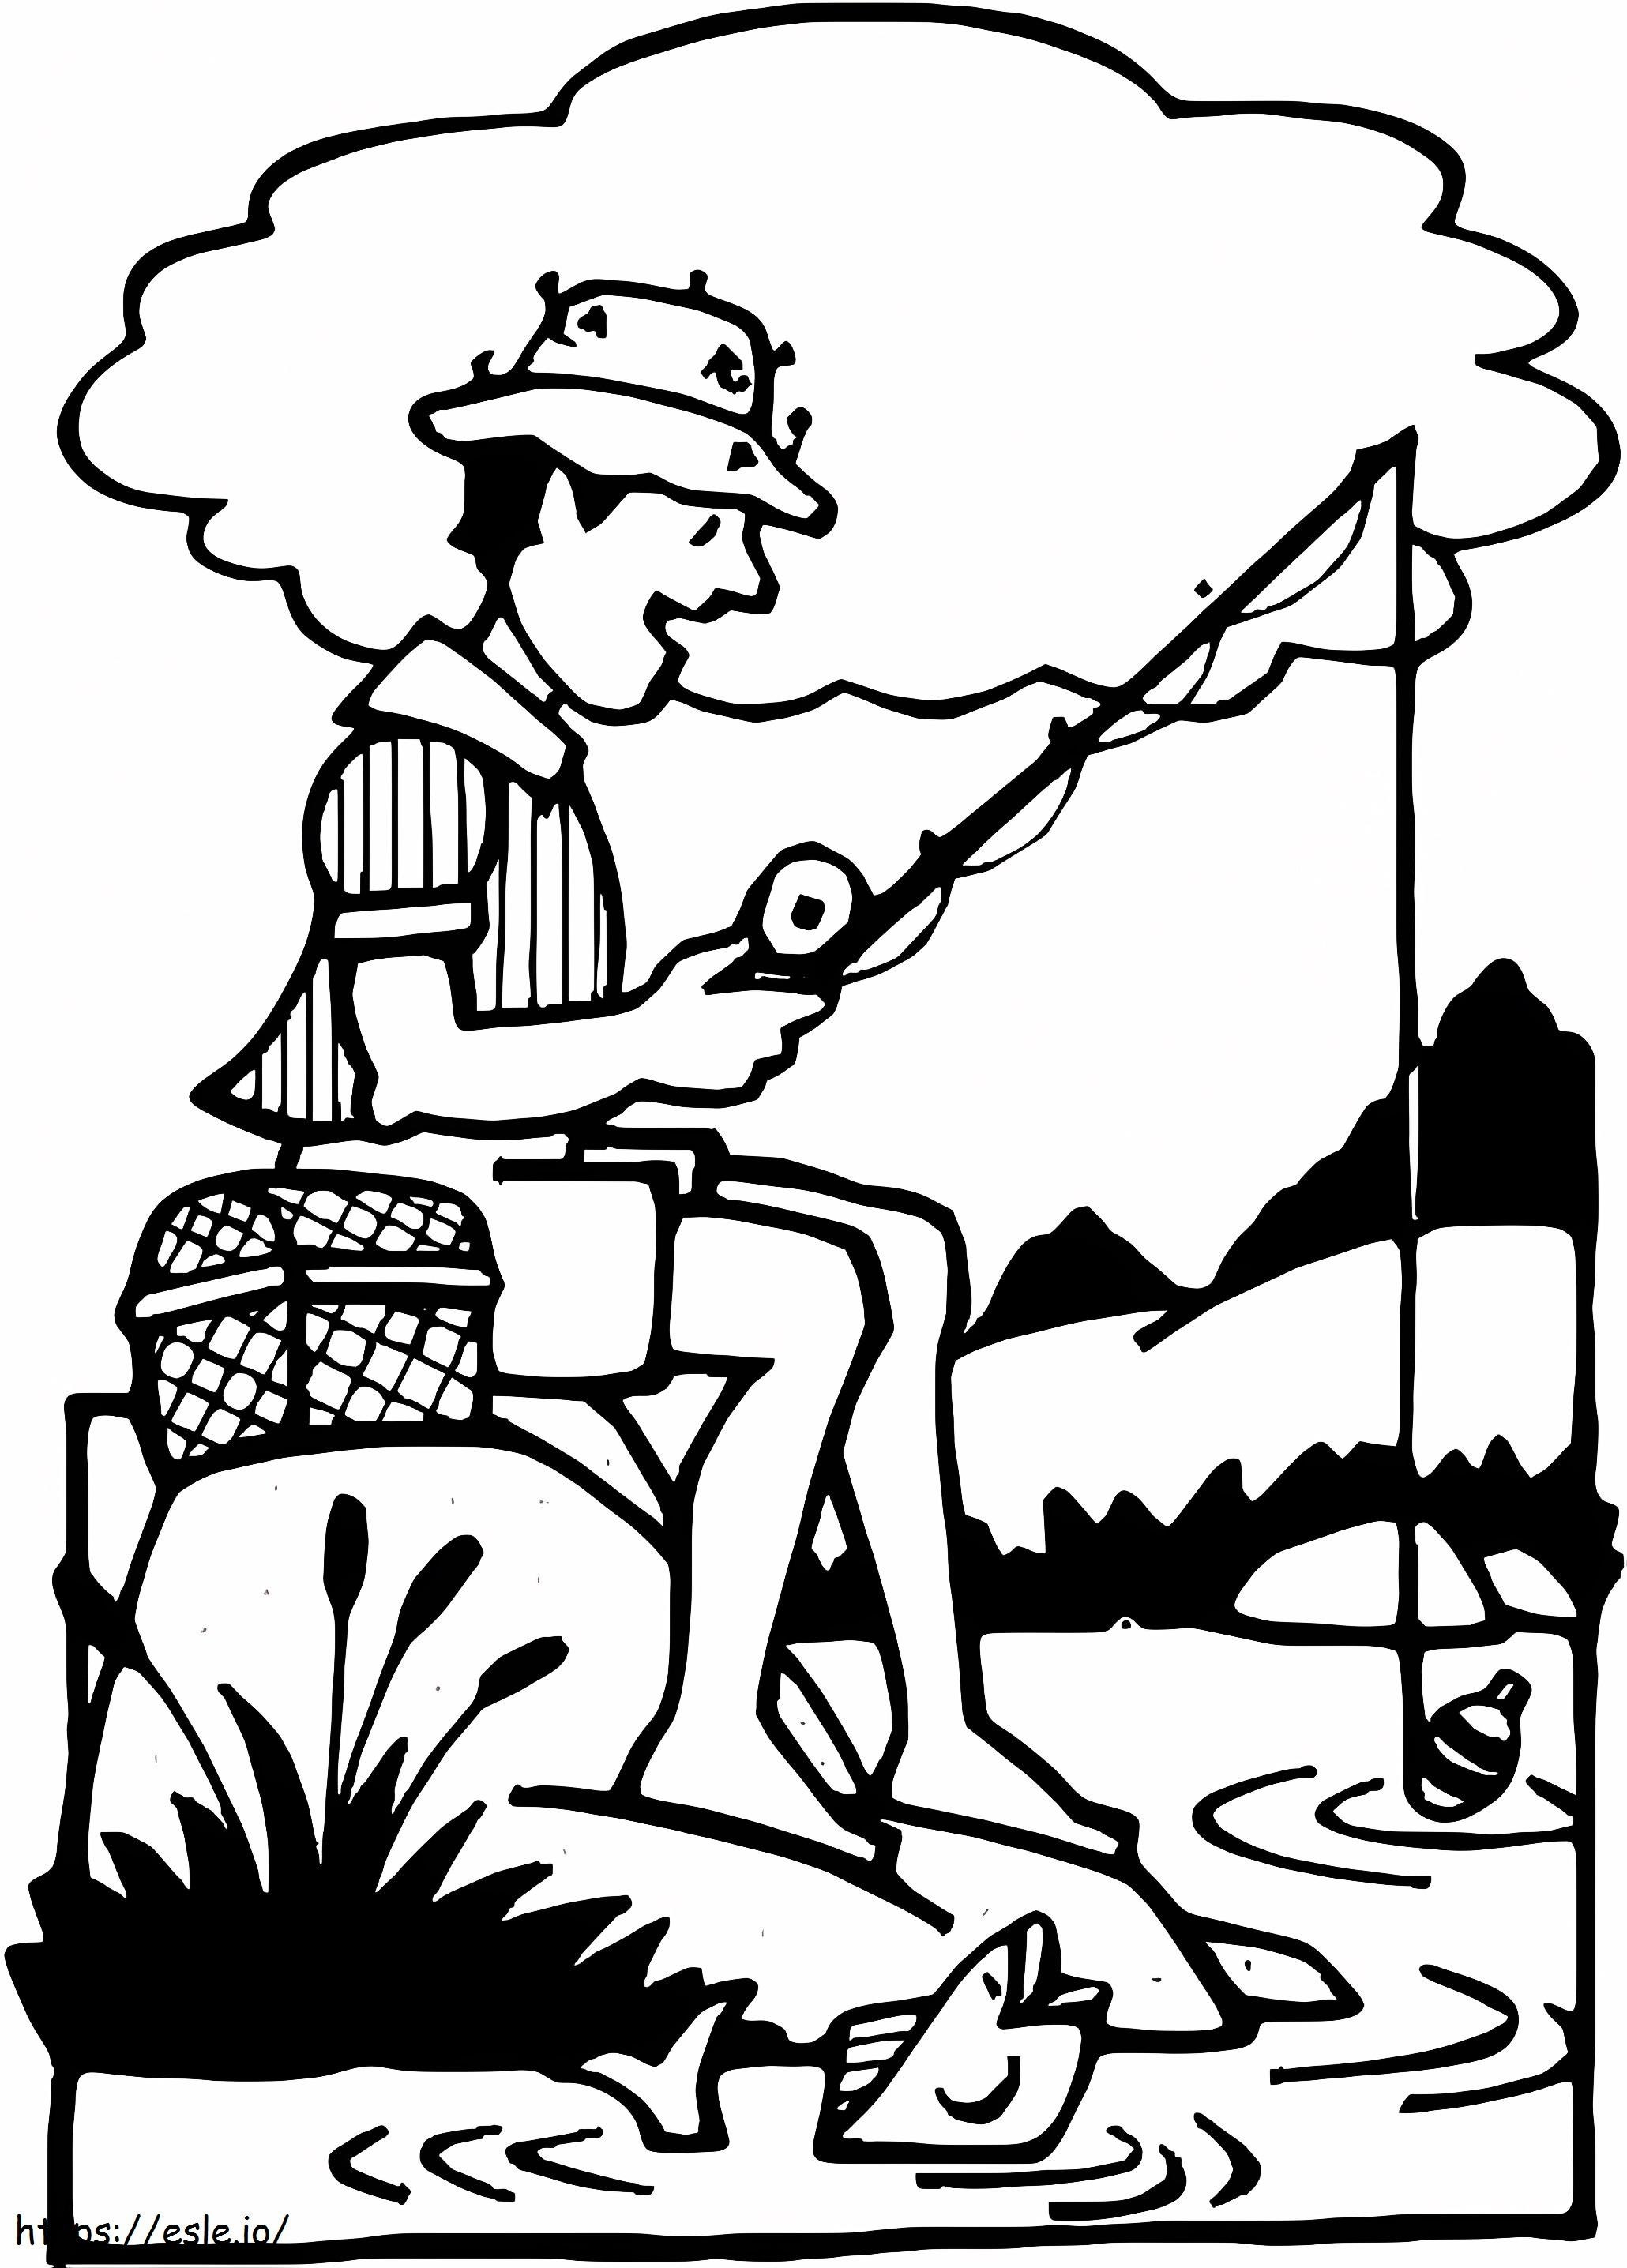 Fishing Landscape coloring page